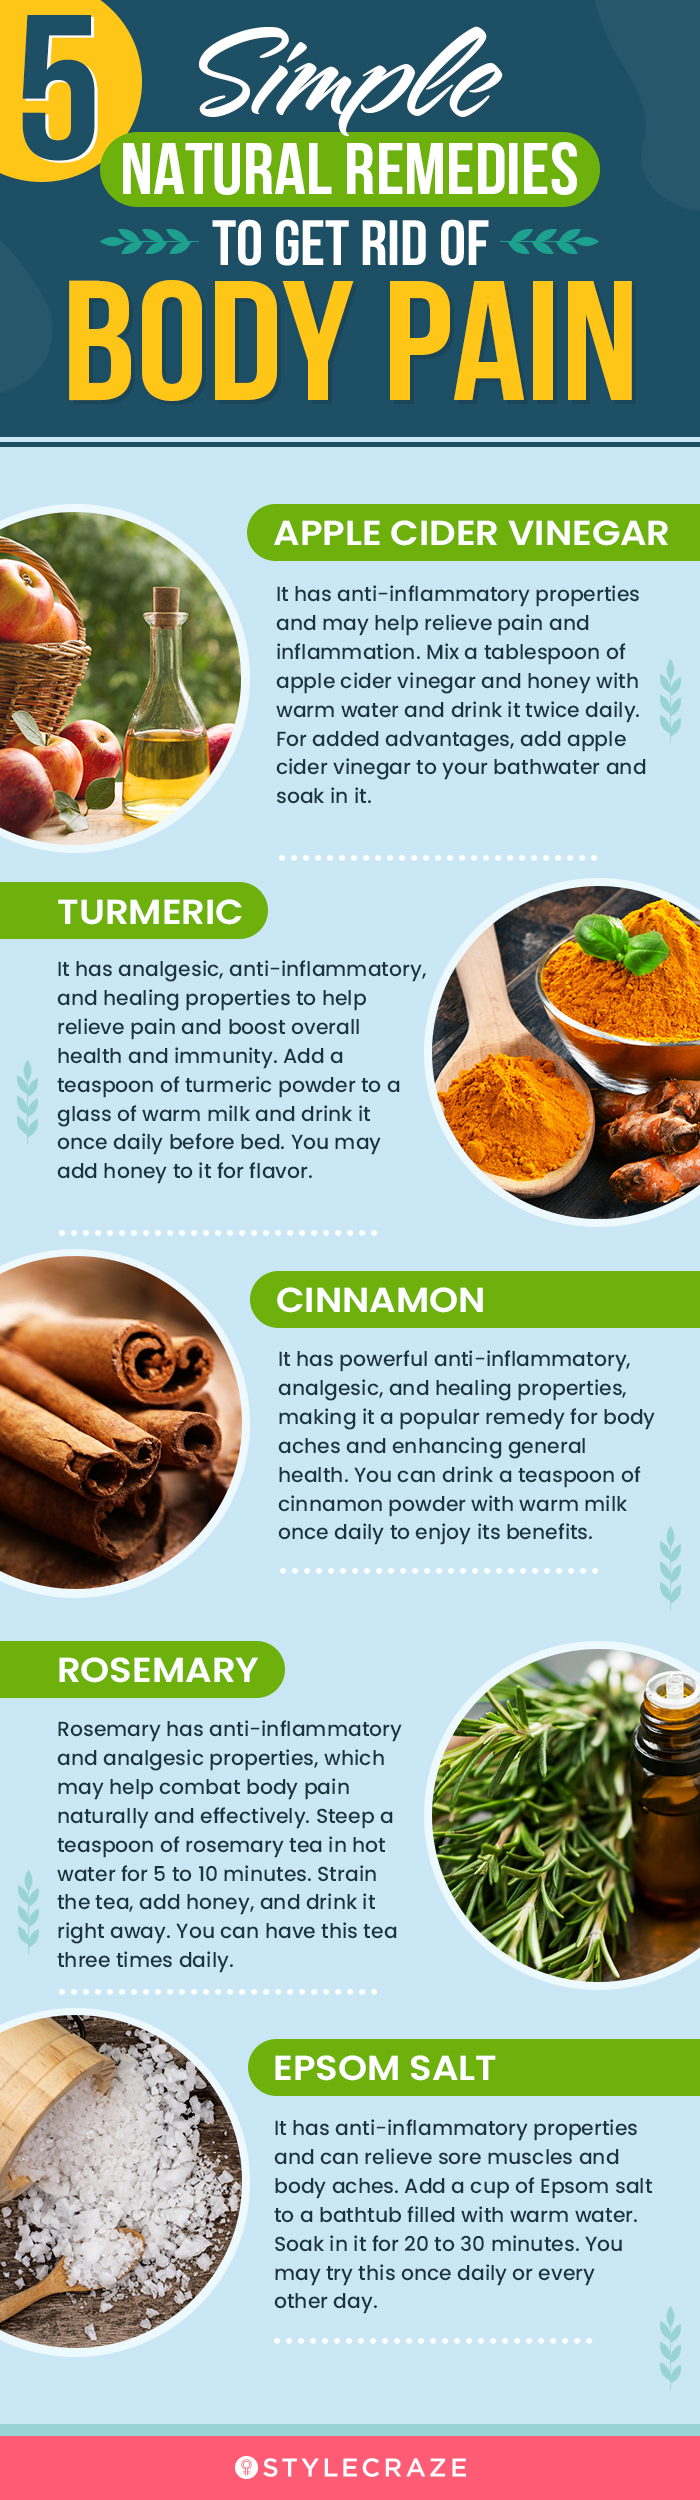 5 simple natural remedies to get rid of body pain [infographic]